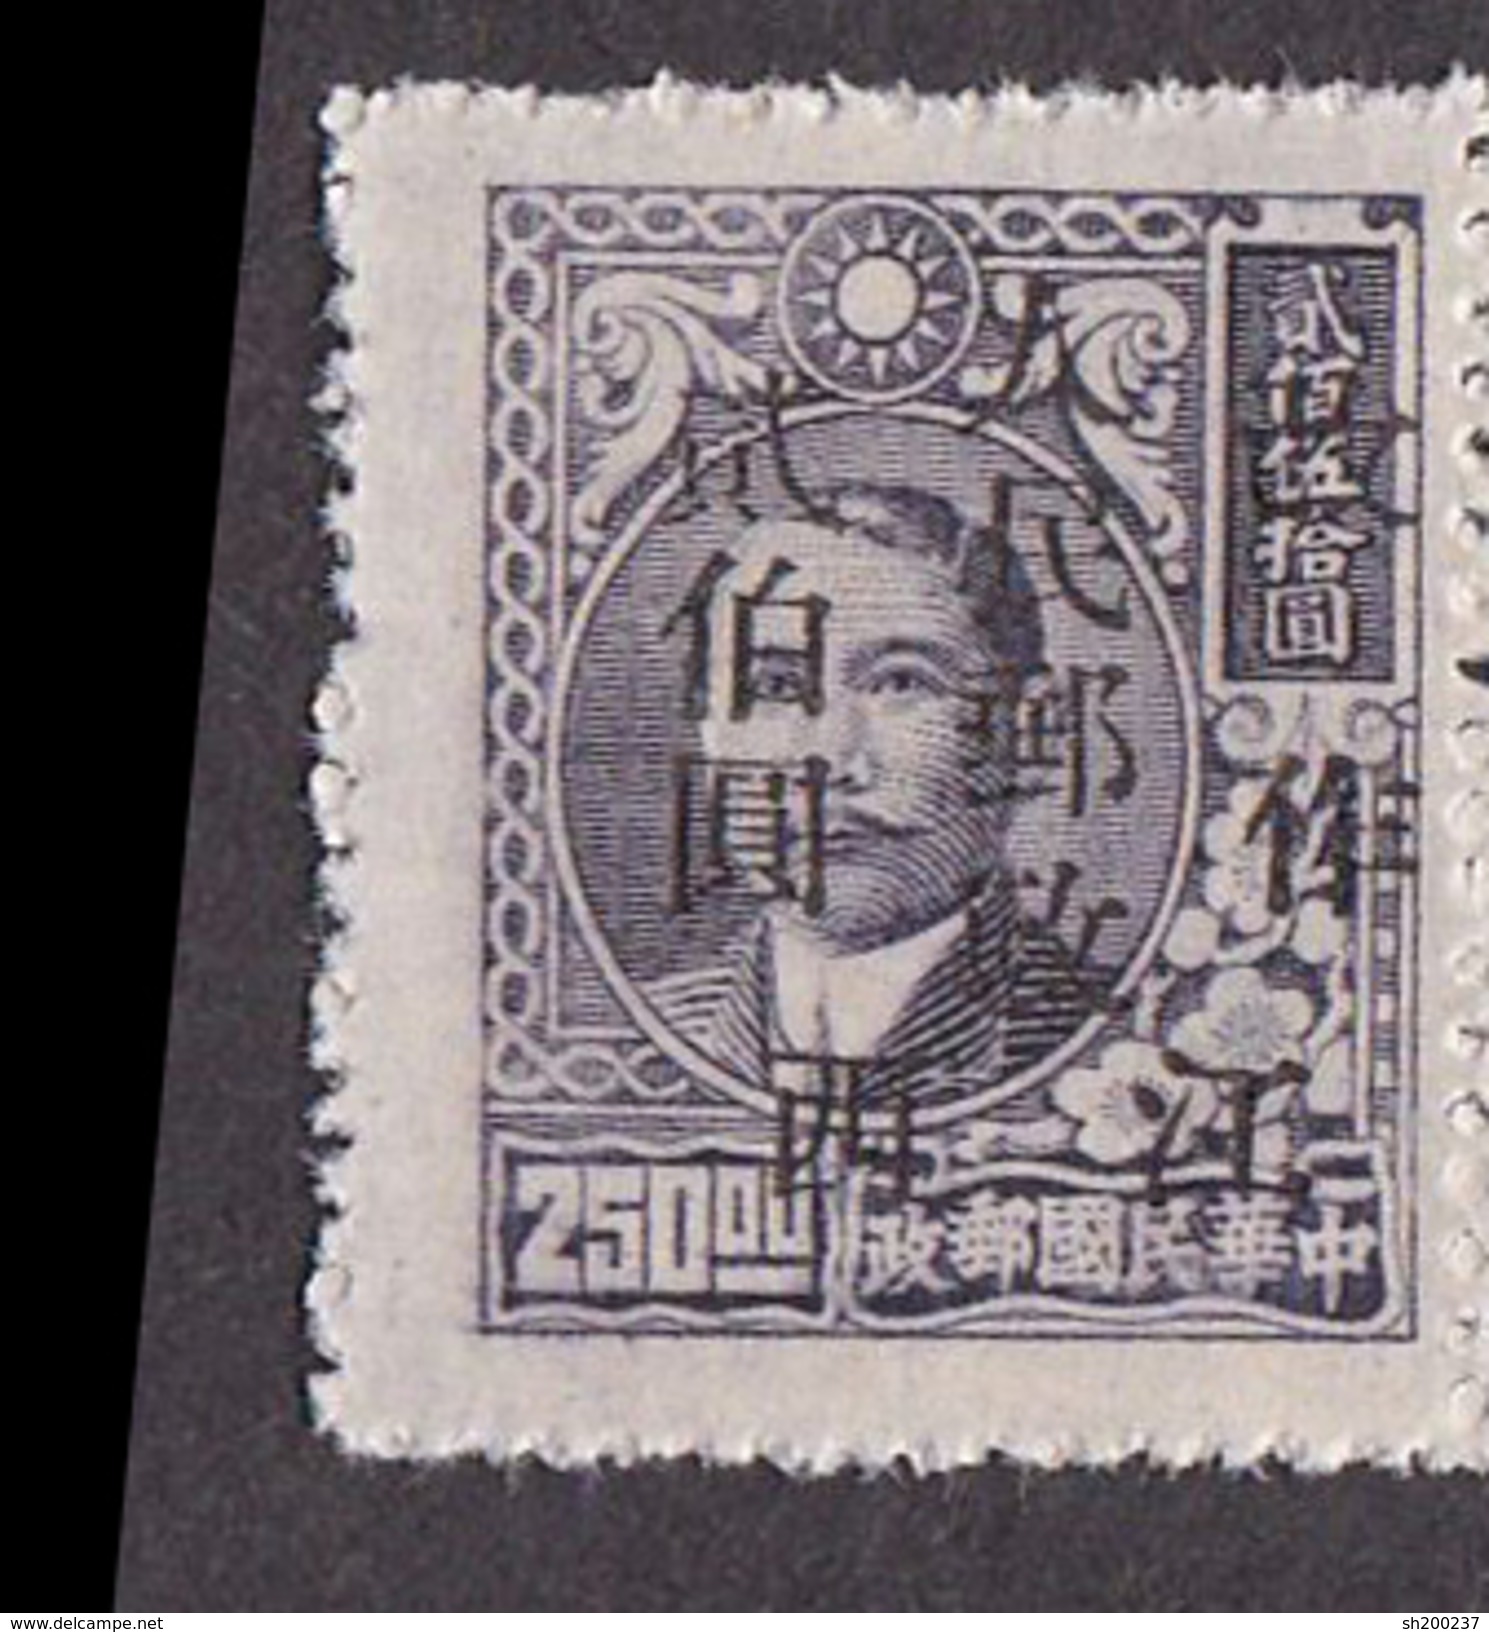 Liberated  Central China 1949  CC159 (6L32) $200 On $250 Slate Voilet - Zentralchina 1948-49